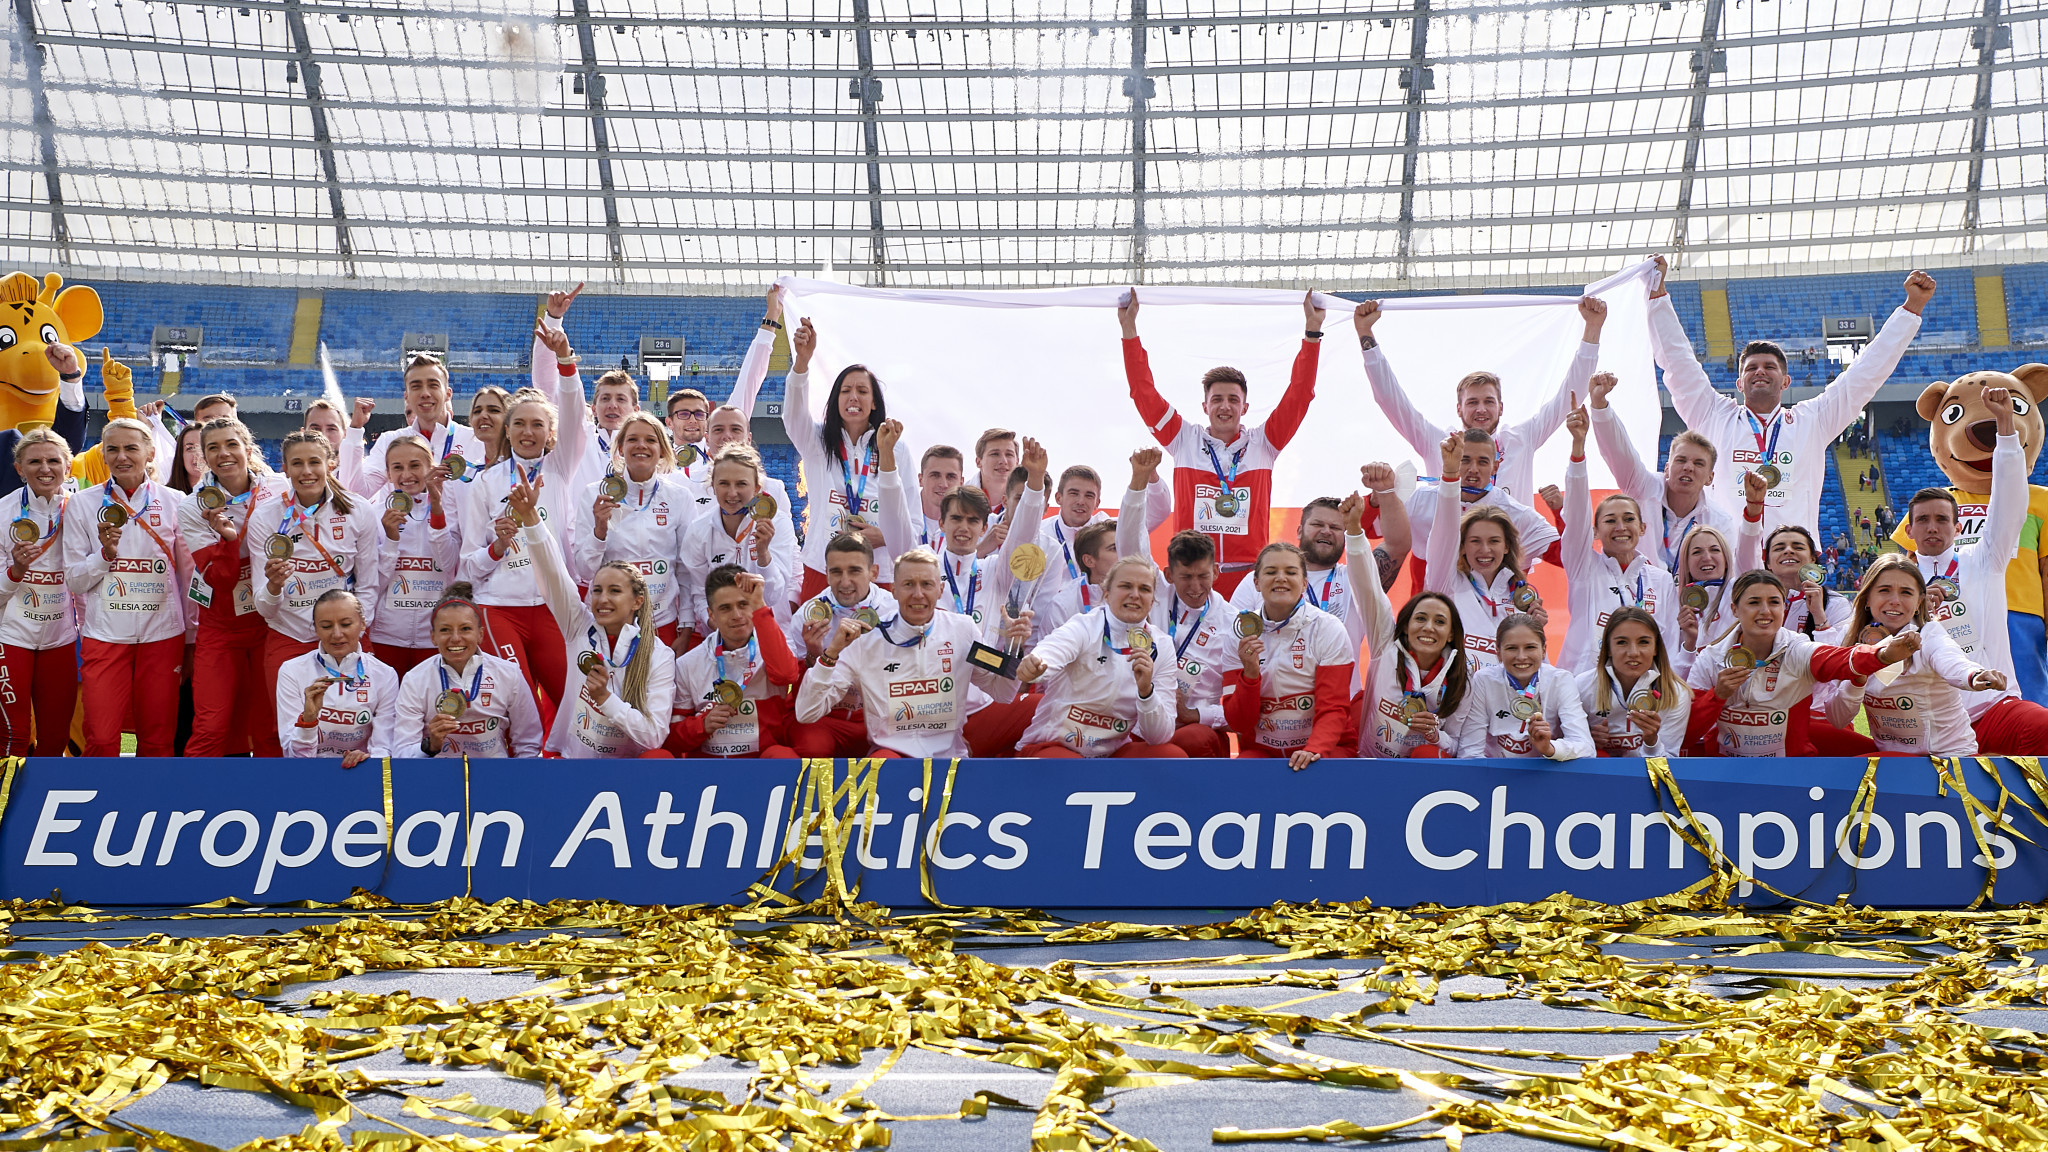 Poland won this year's European Athletics Team Championships Super League on home soil ©Getty Images